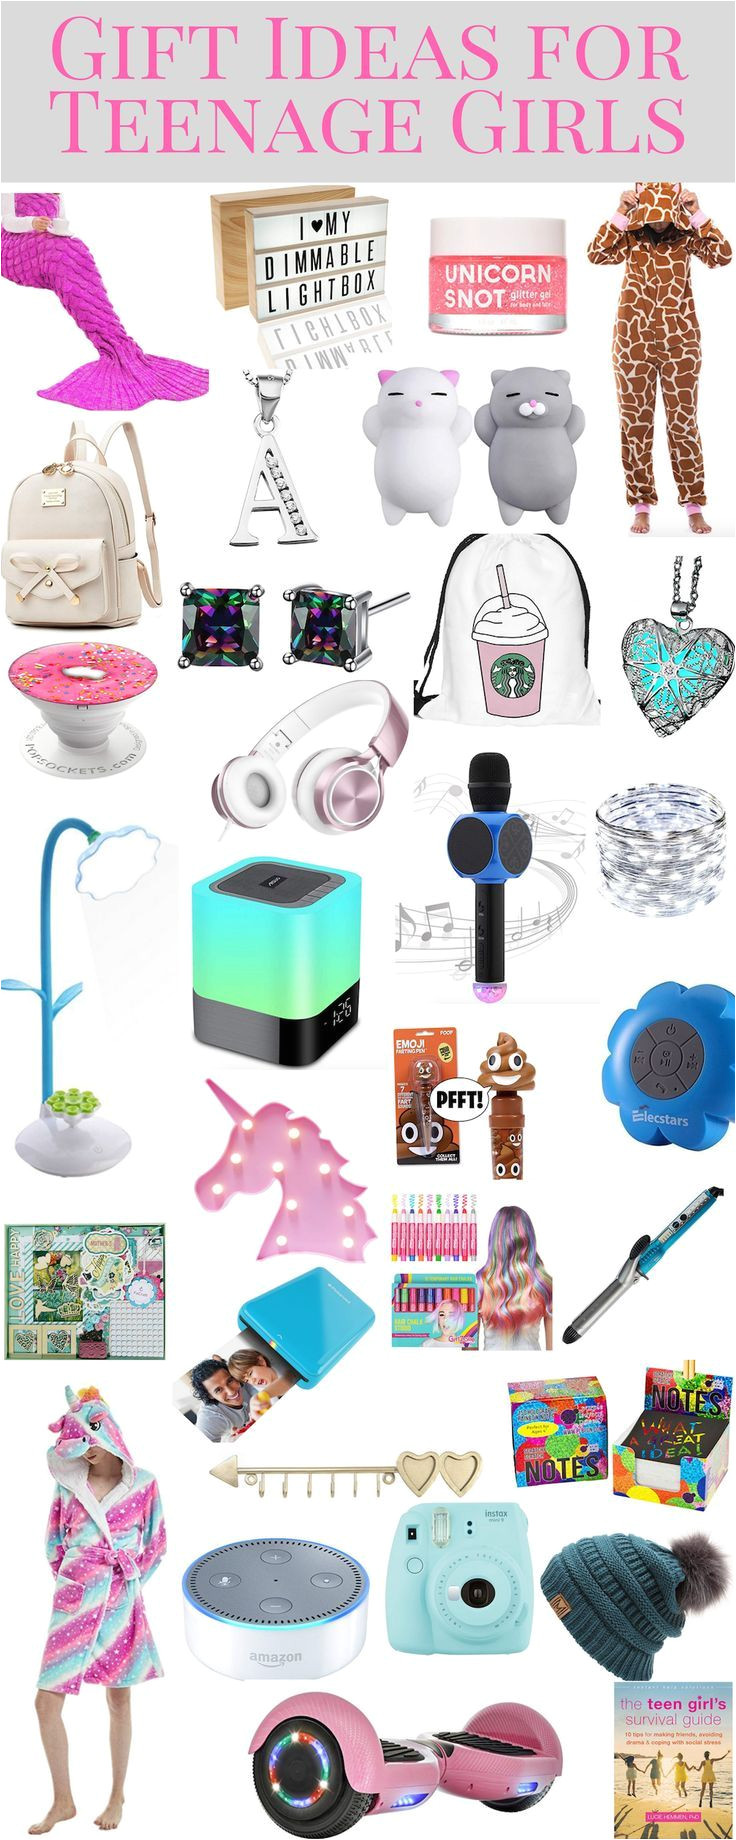 gift ideas for teenage girls and tween girls does your teen girl love unicorns or girly things or is she more into sports or art